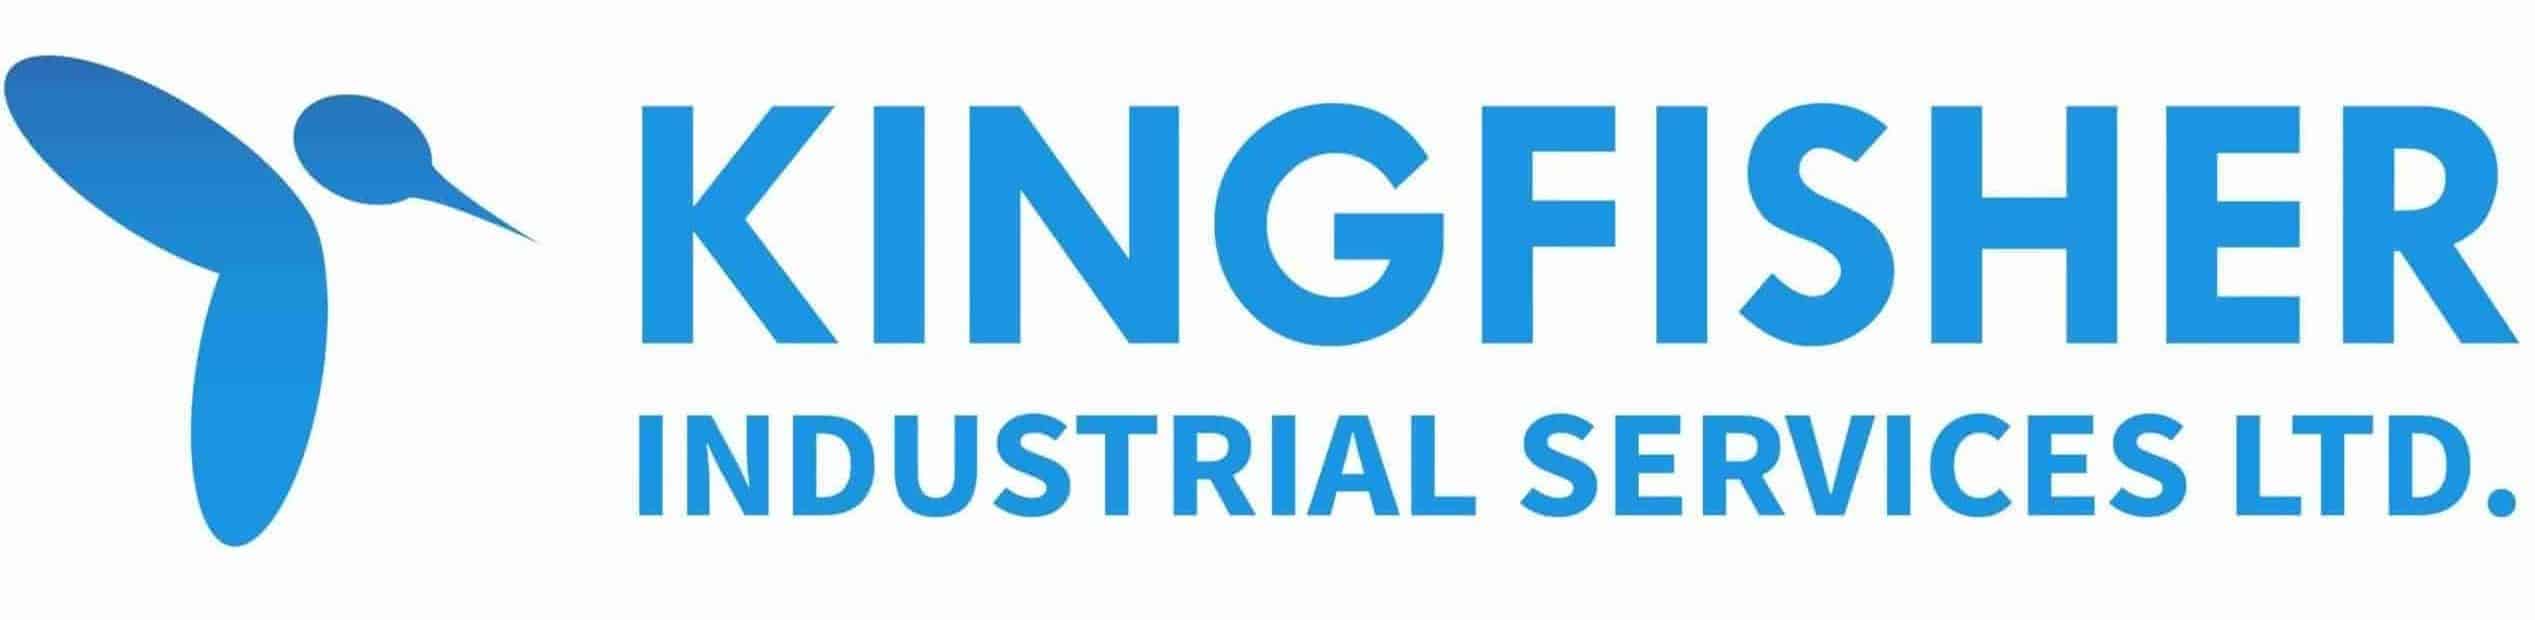 Kingfisher Industrial Services